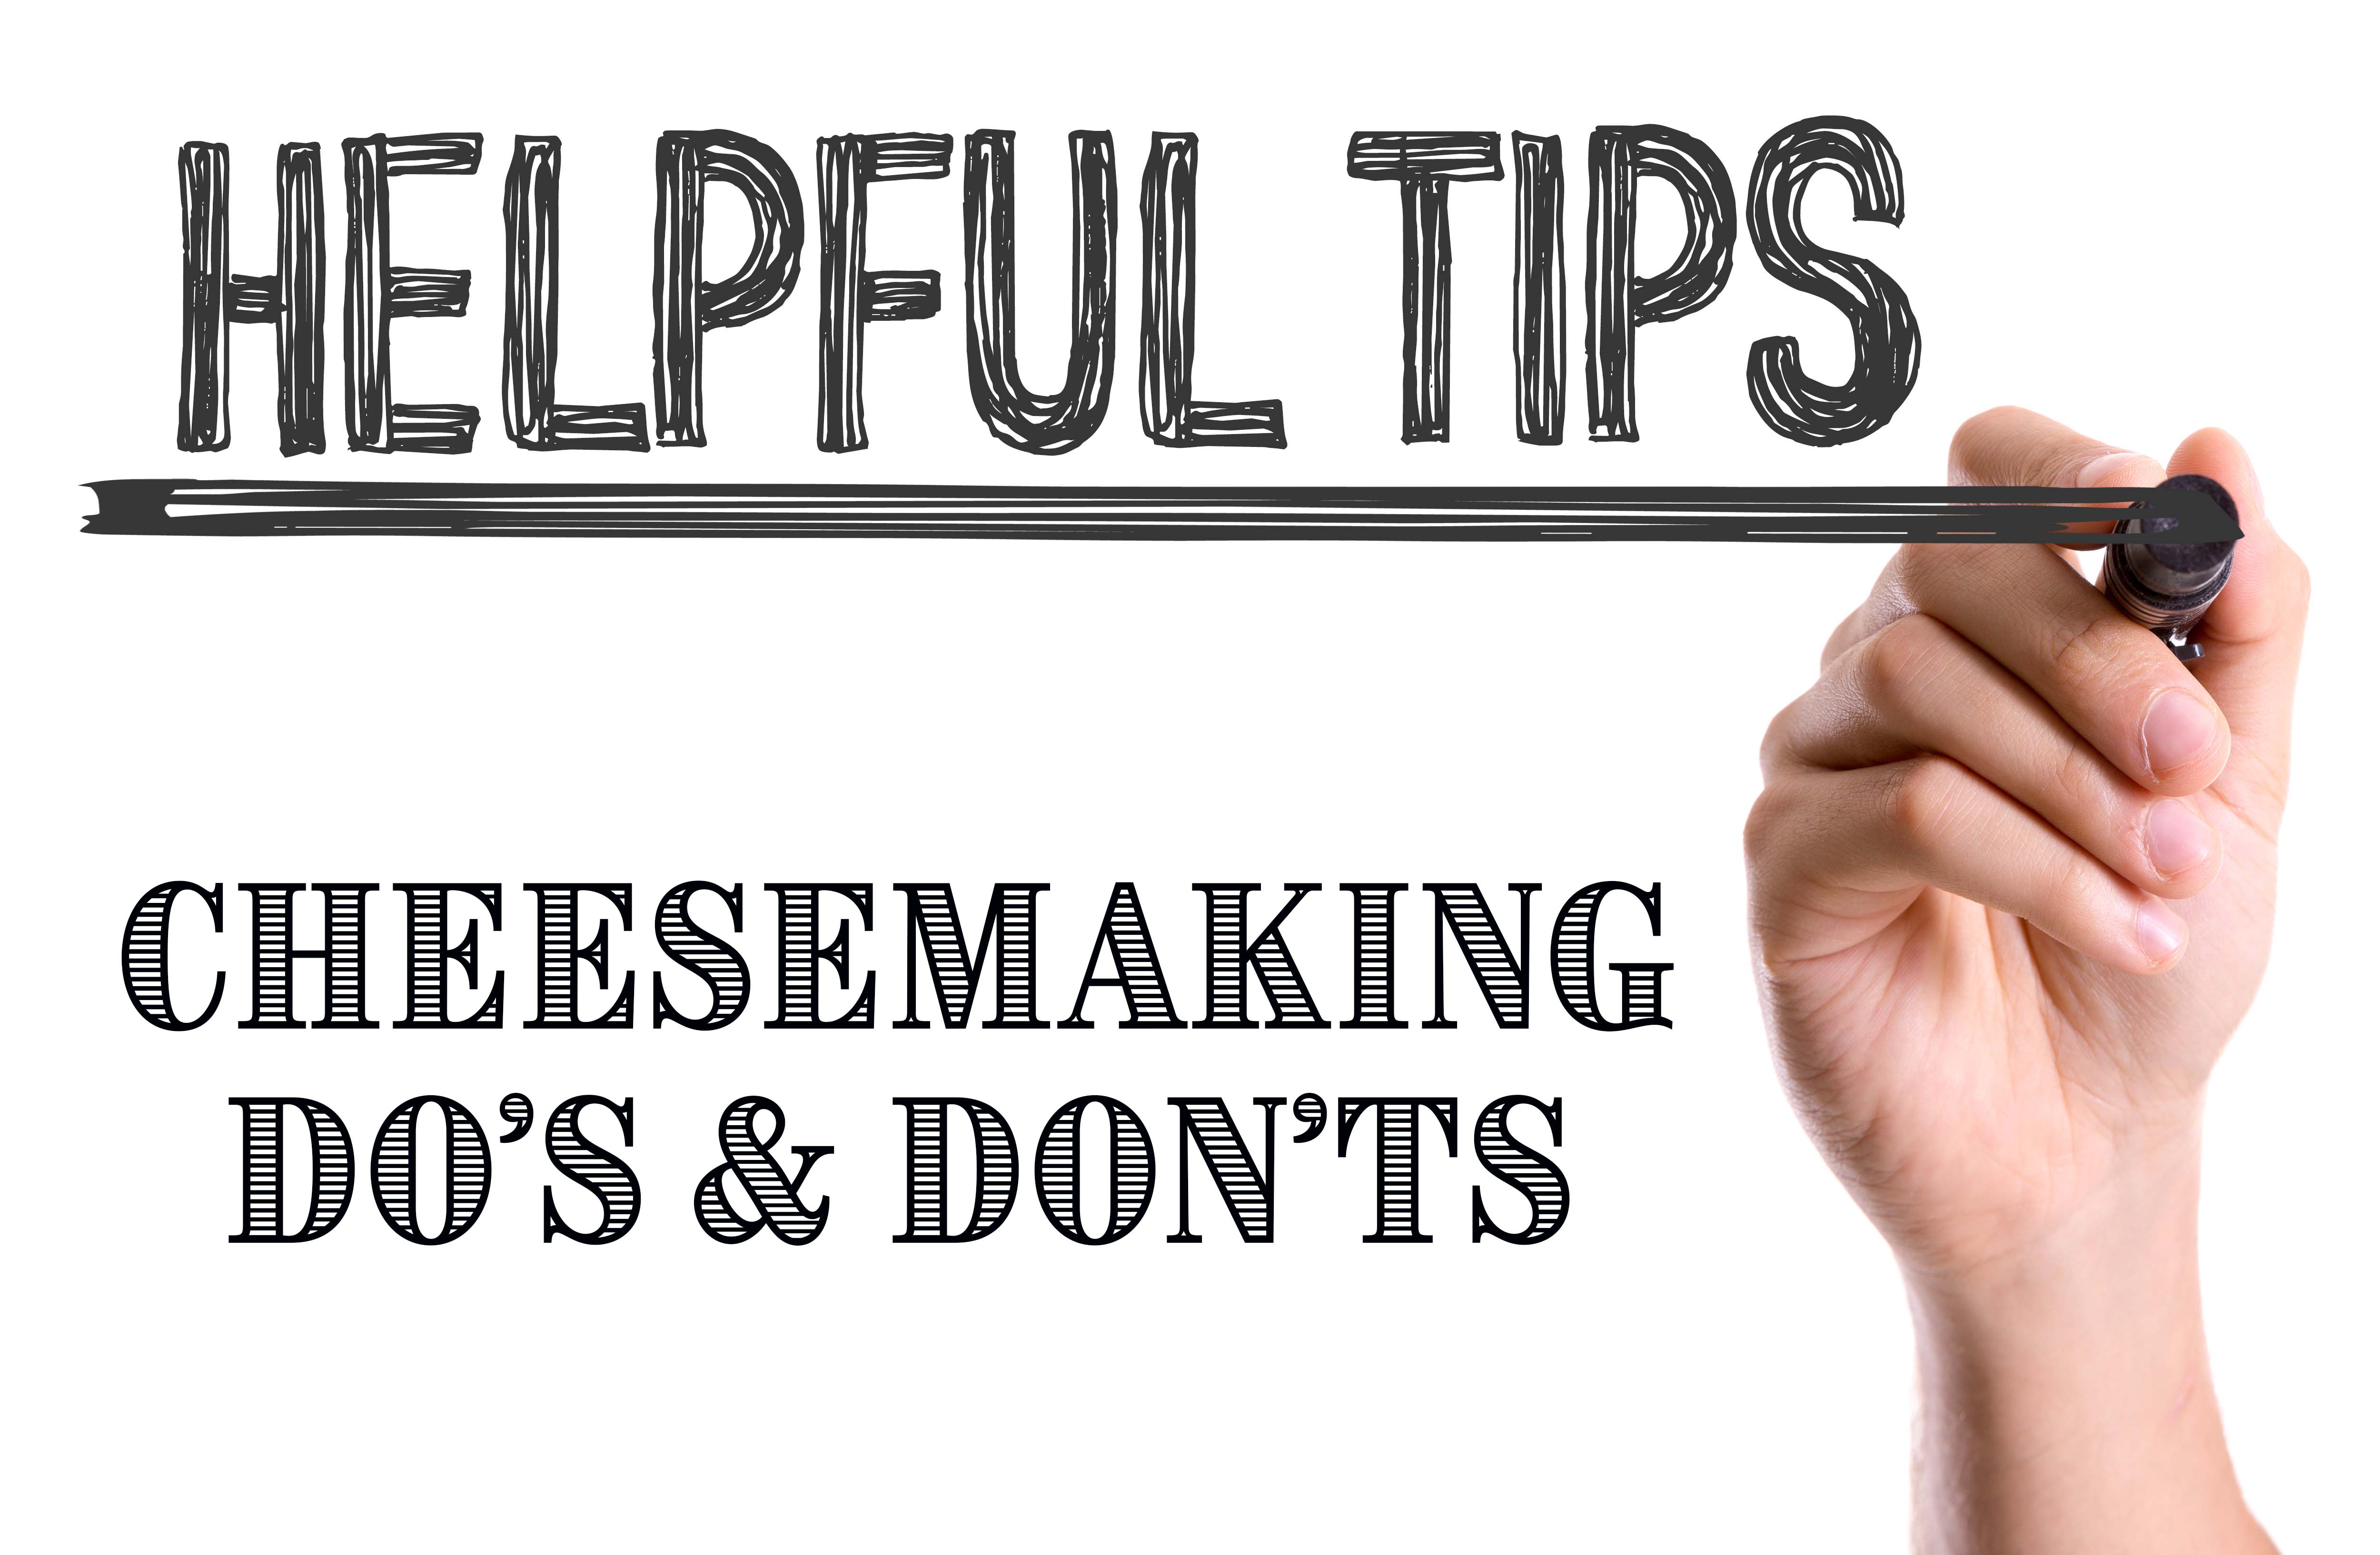 Cheesemaking Tips - Do's and Don'ts by The Beverage People